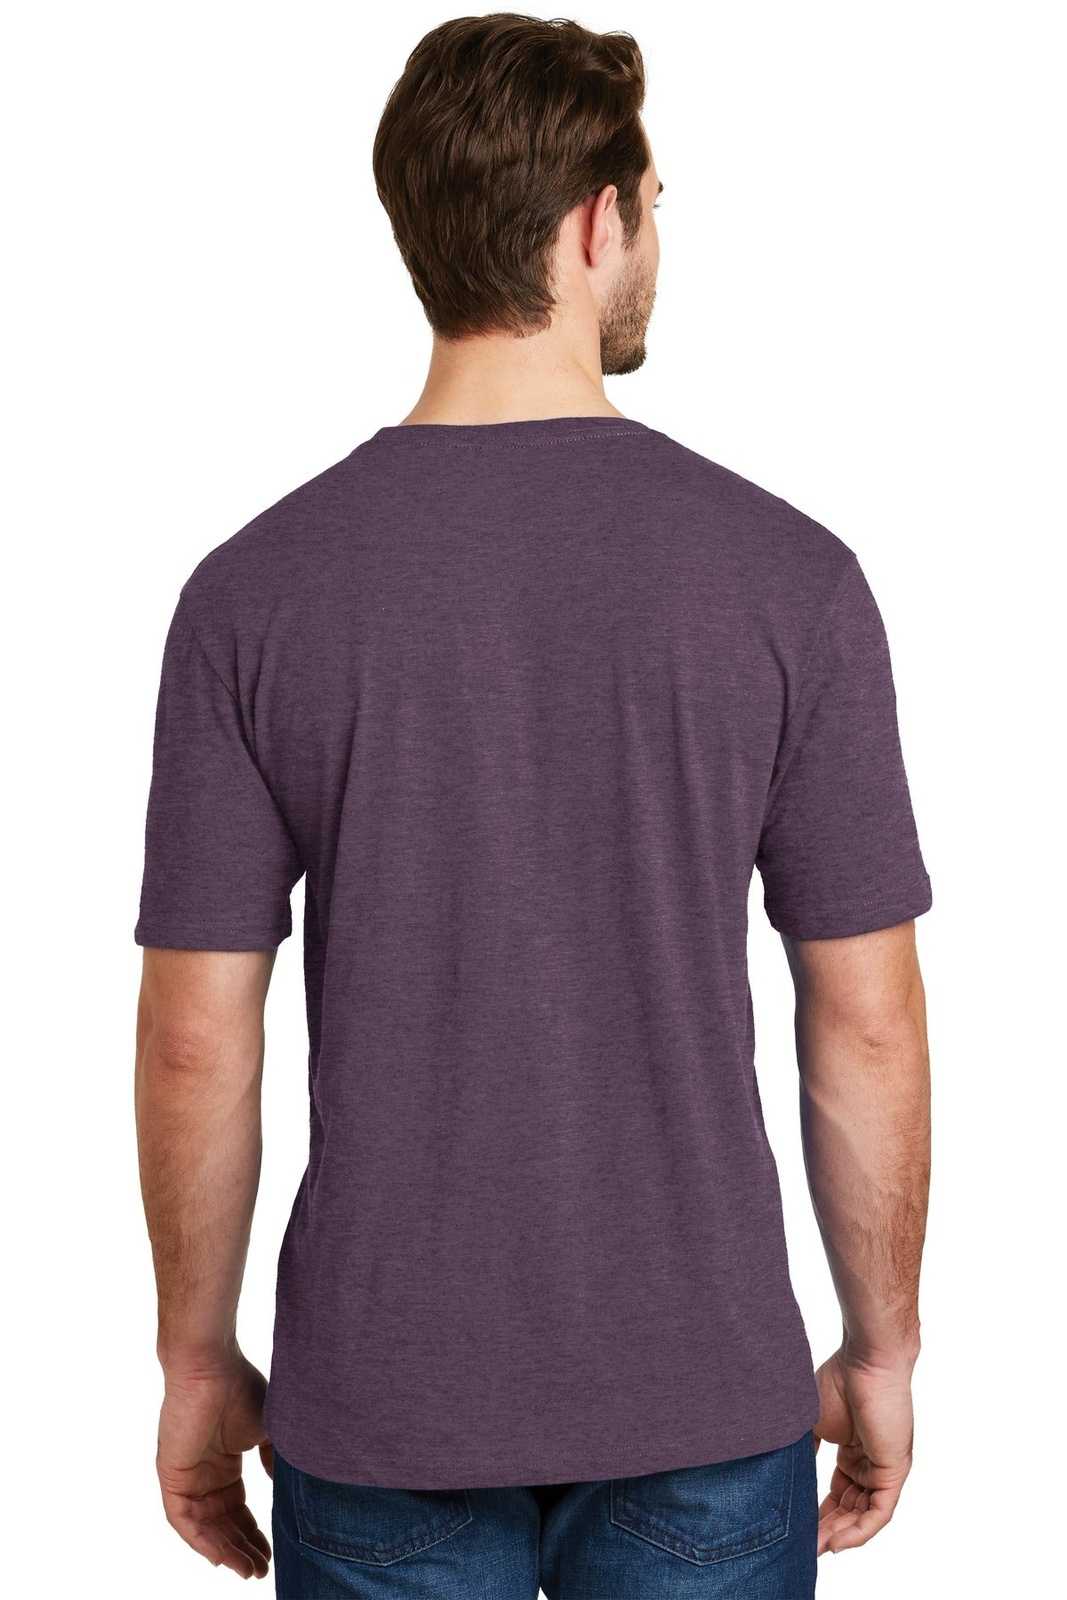 District DM108 Perfect Blend Tee - Heathered Eggplant - HIT a Double - 2